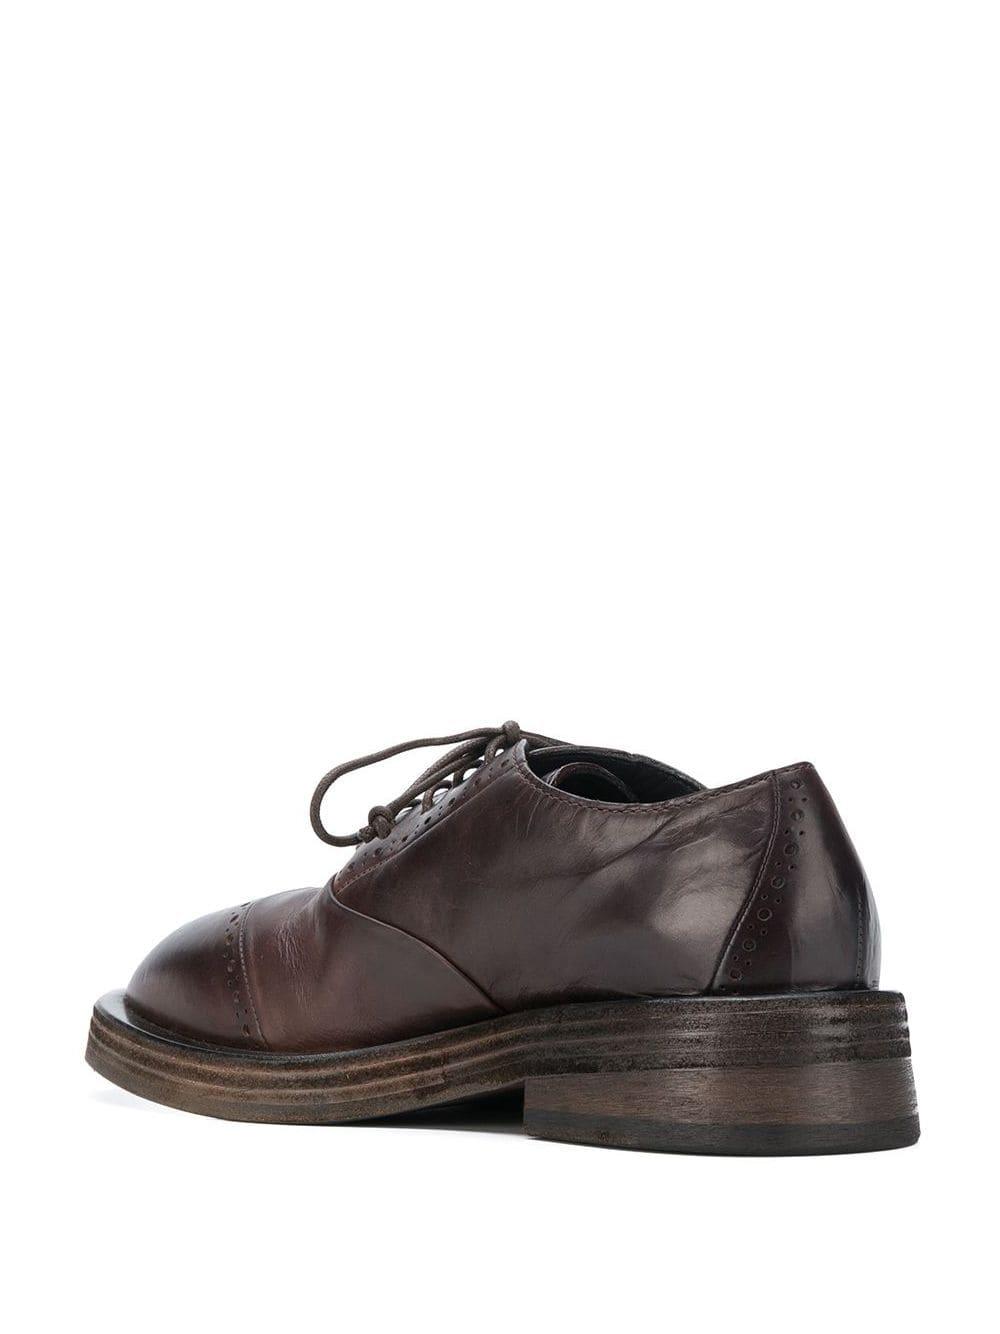 Marsèll Leather Classic Embroidered Brogues in Brown for Men - Lyst